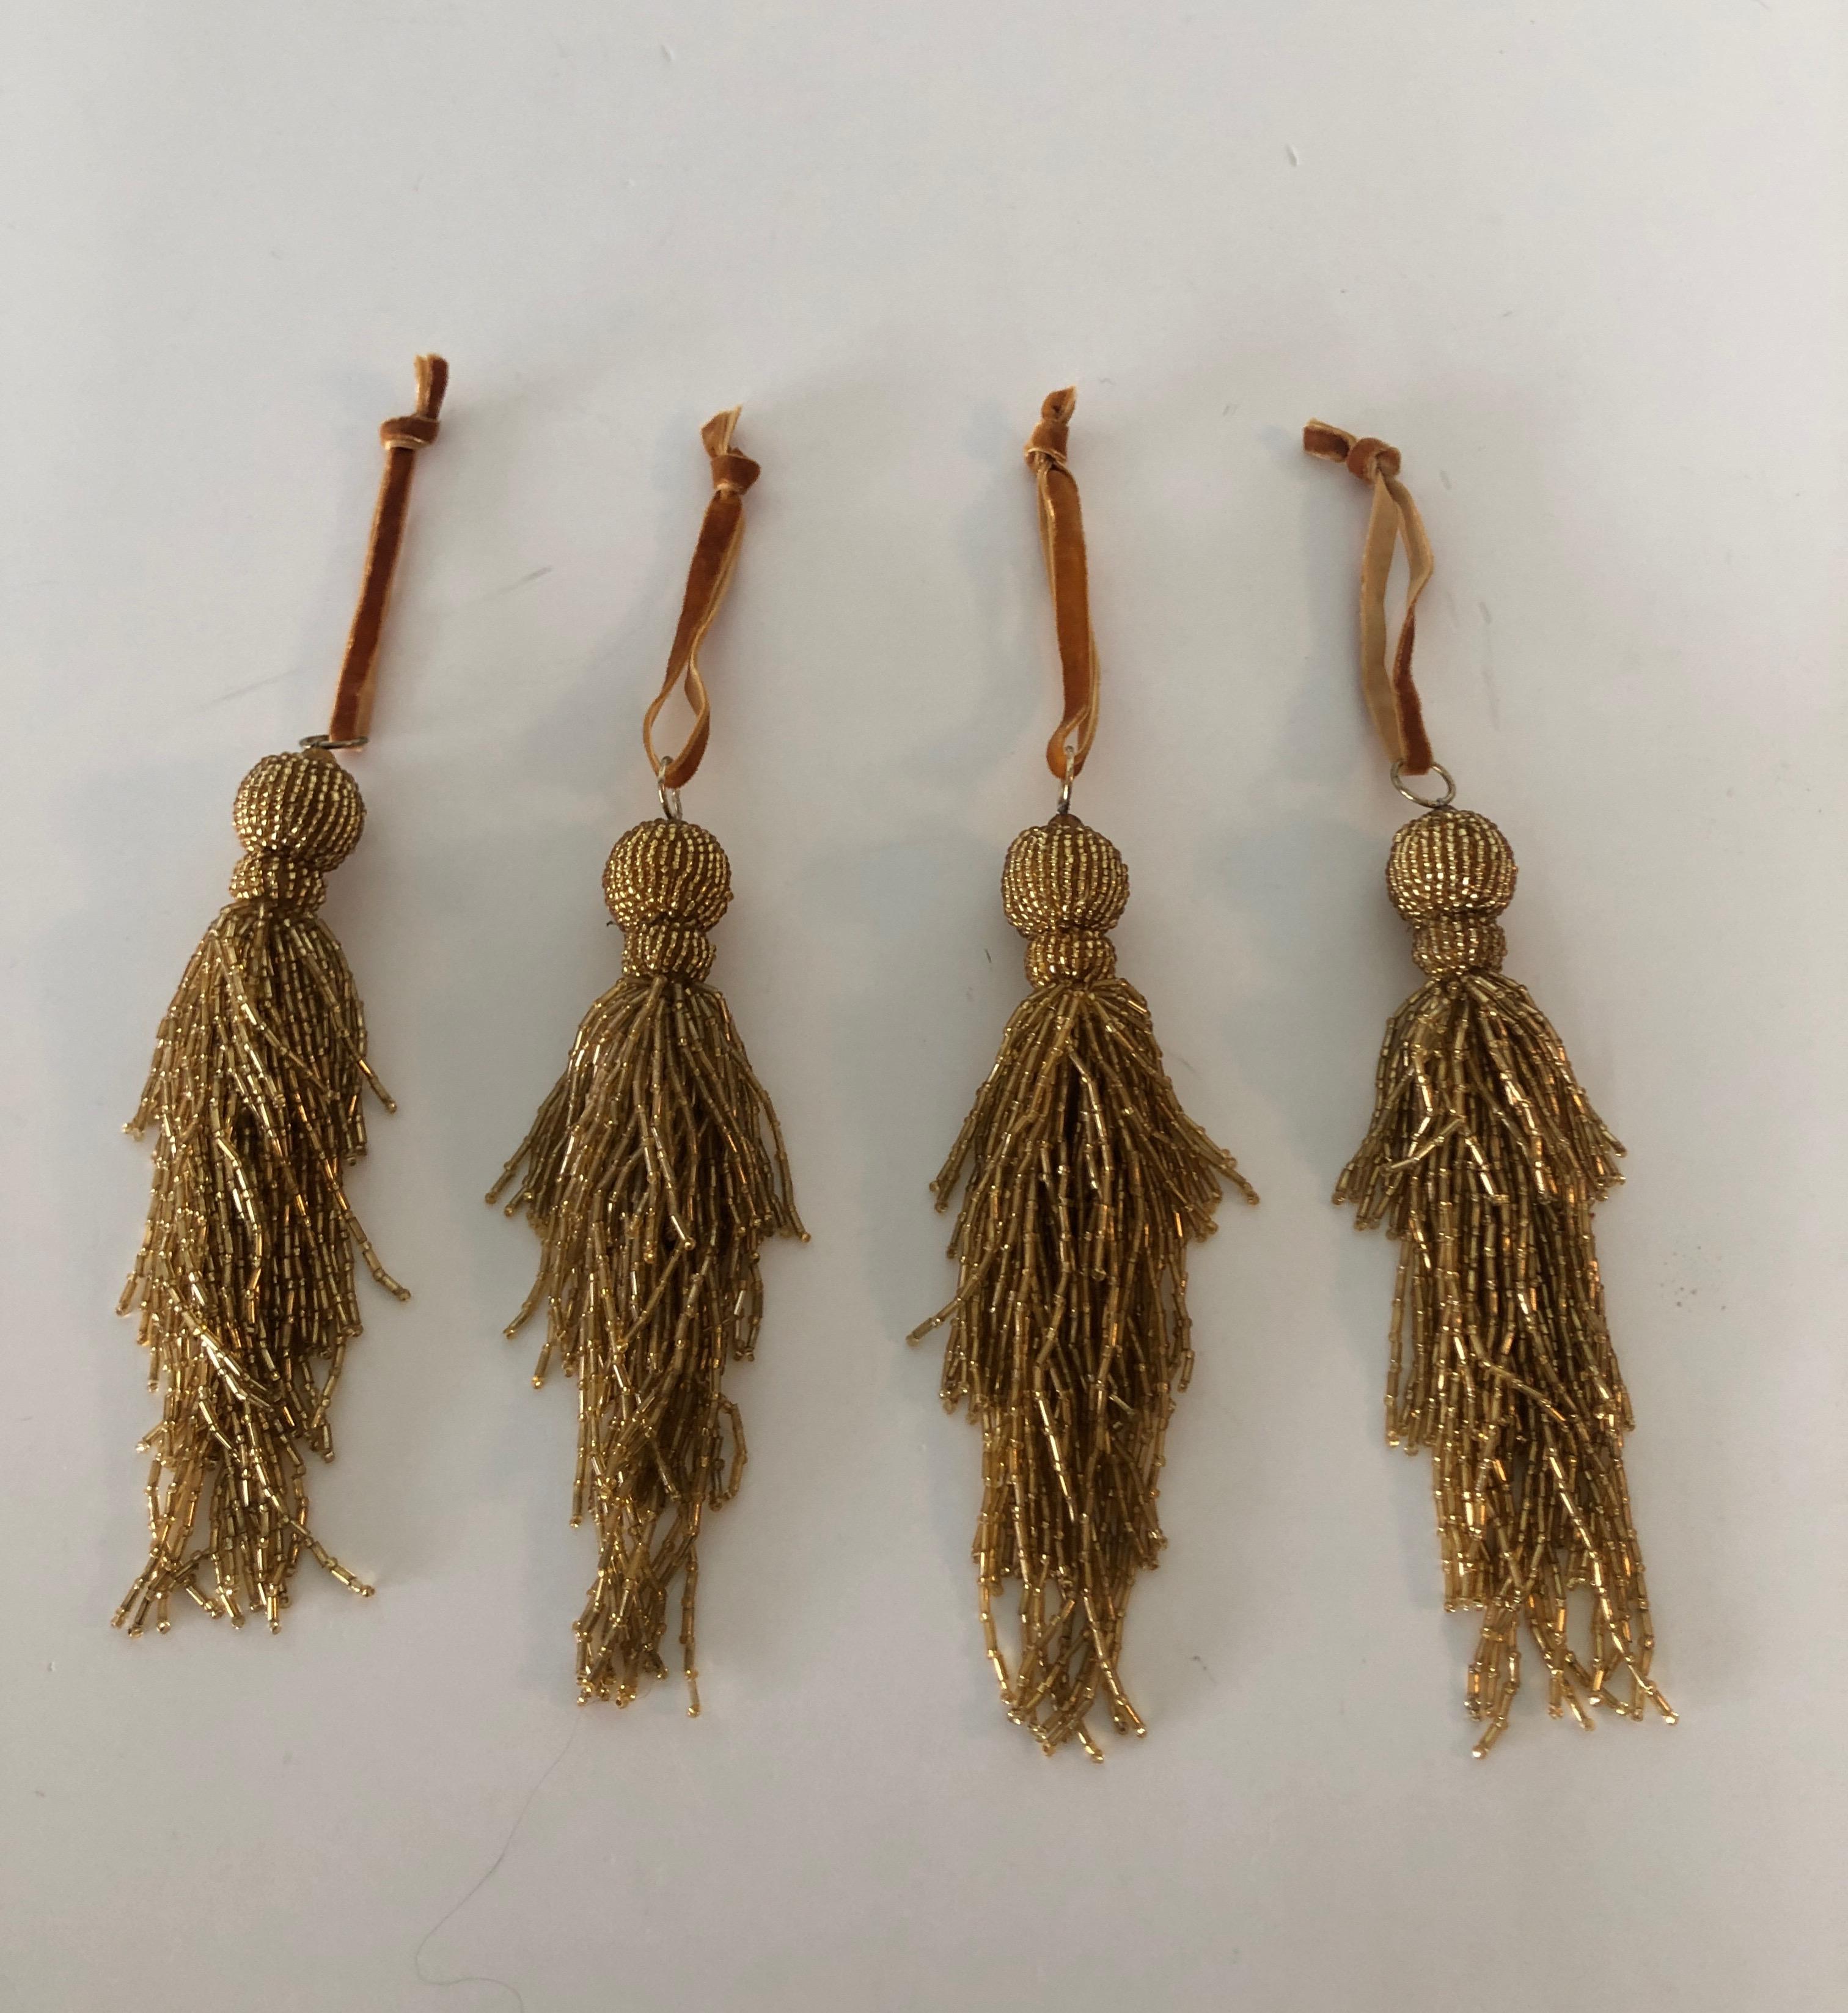 Gold beads holiday tassels with a faux suede hanger
Ideal for your Christmas trees.
Size: 9